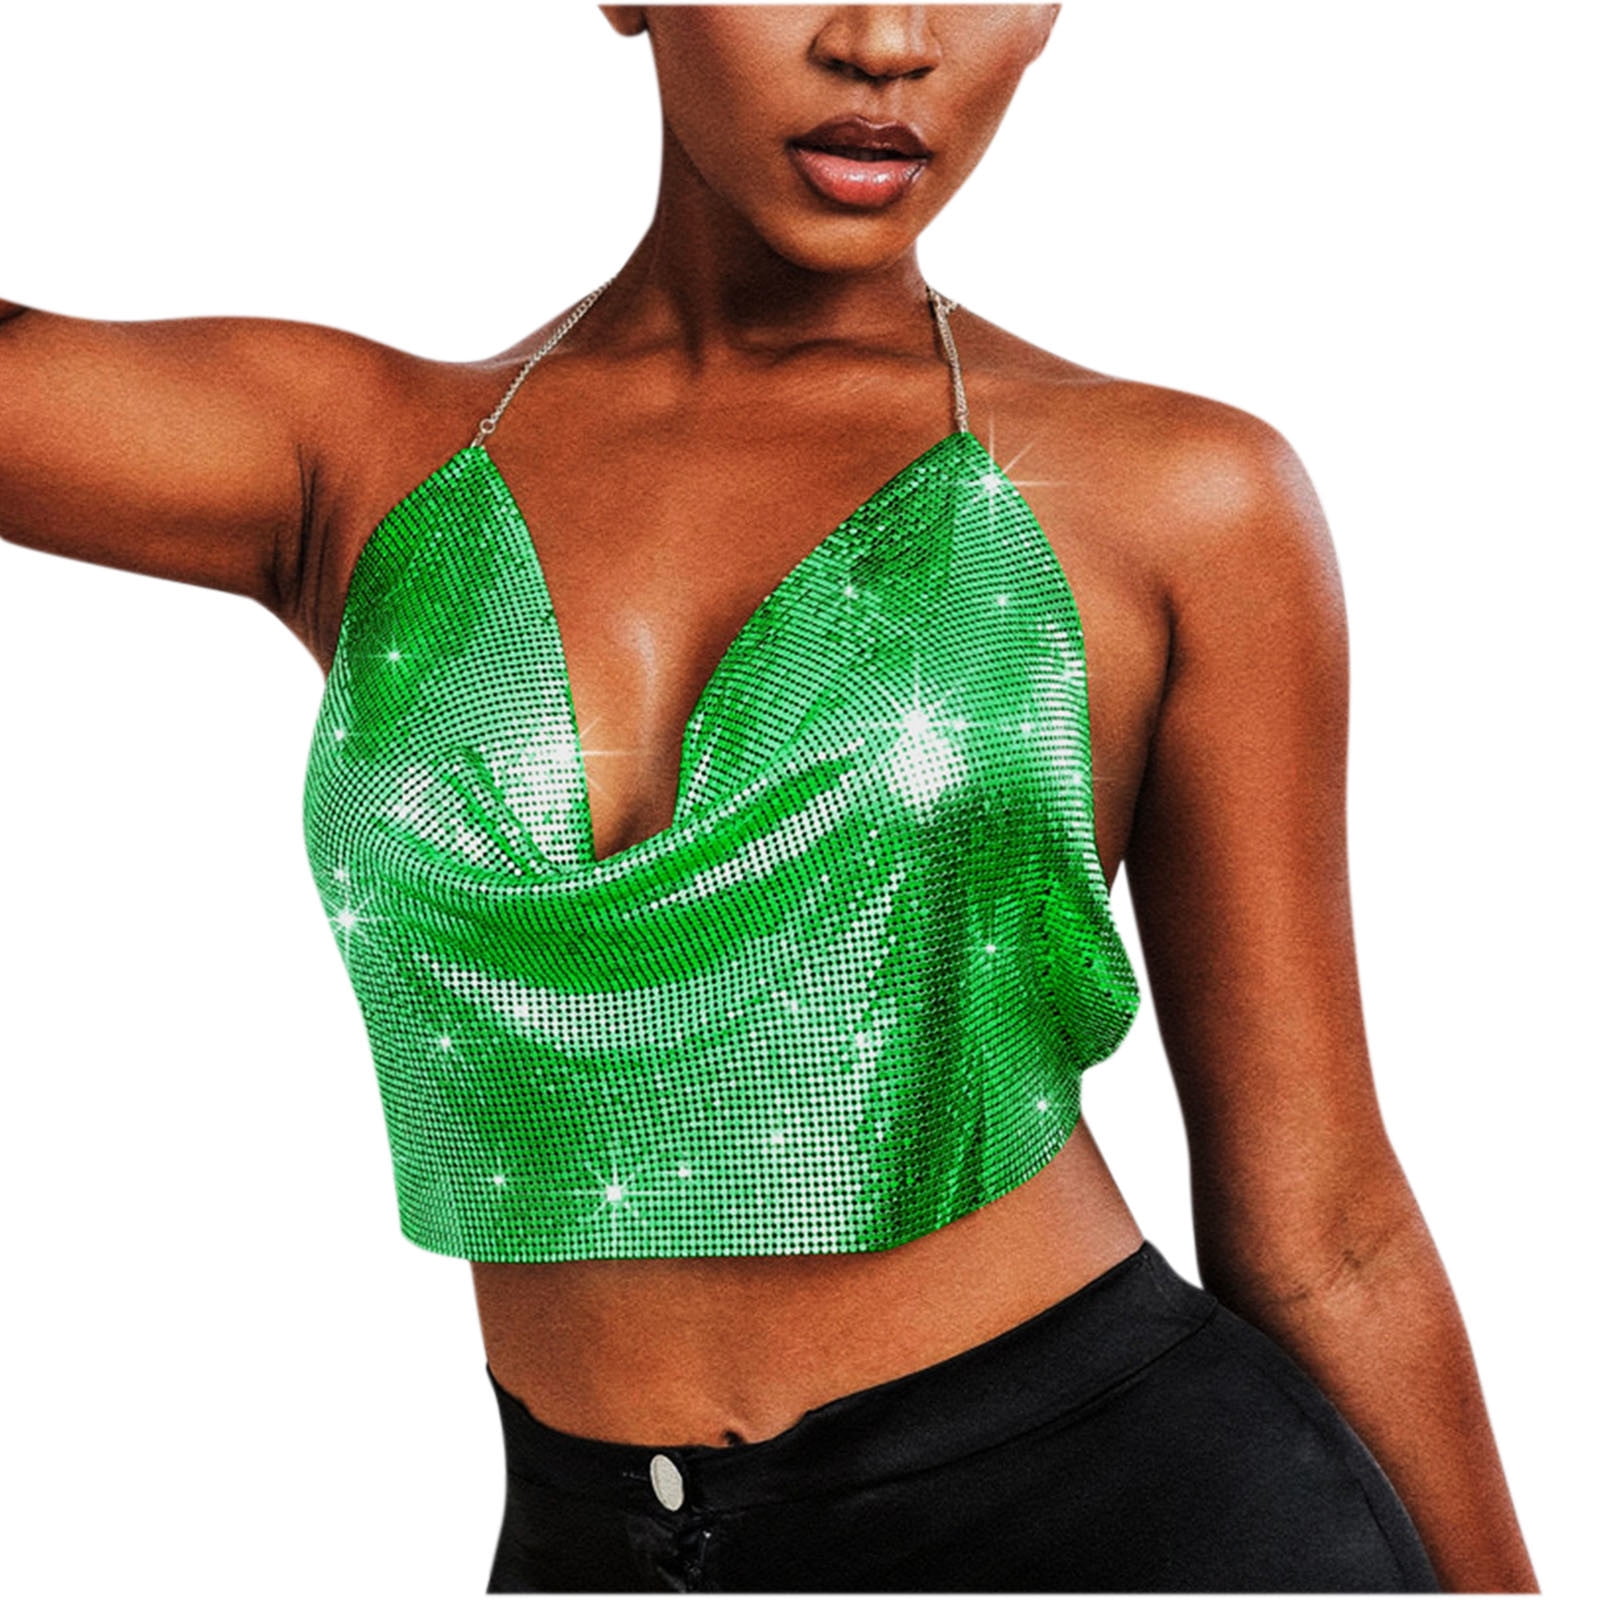 Sparkly halter top, Various colors, Collection 2021